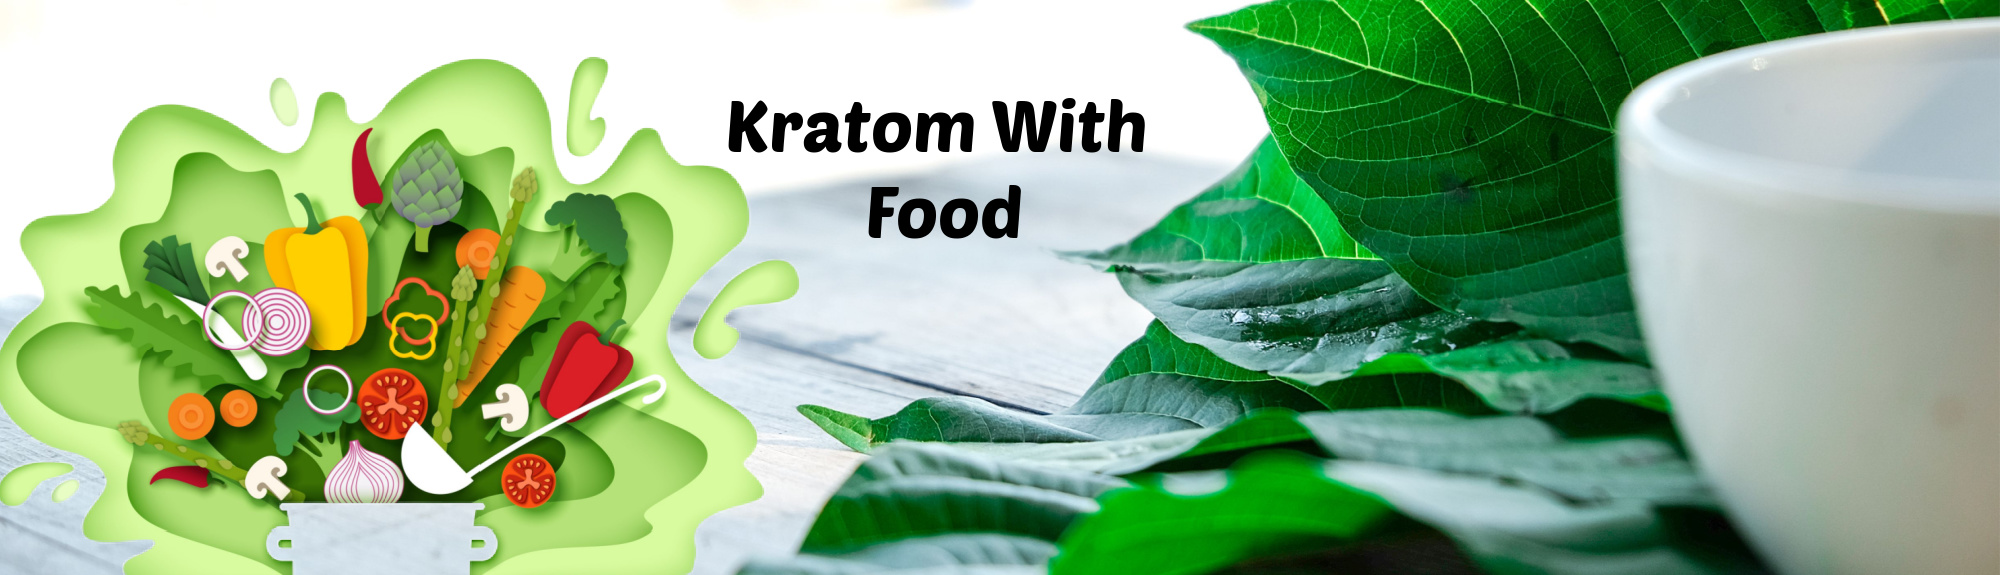 image of kratom with food